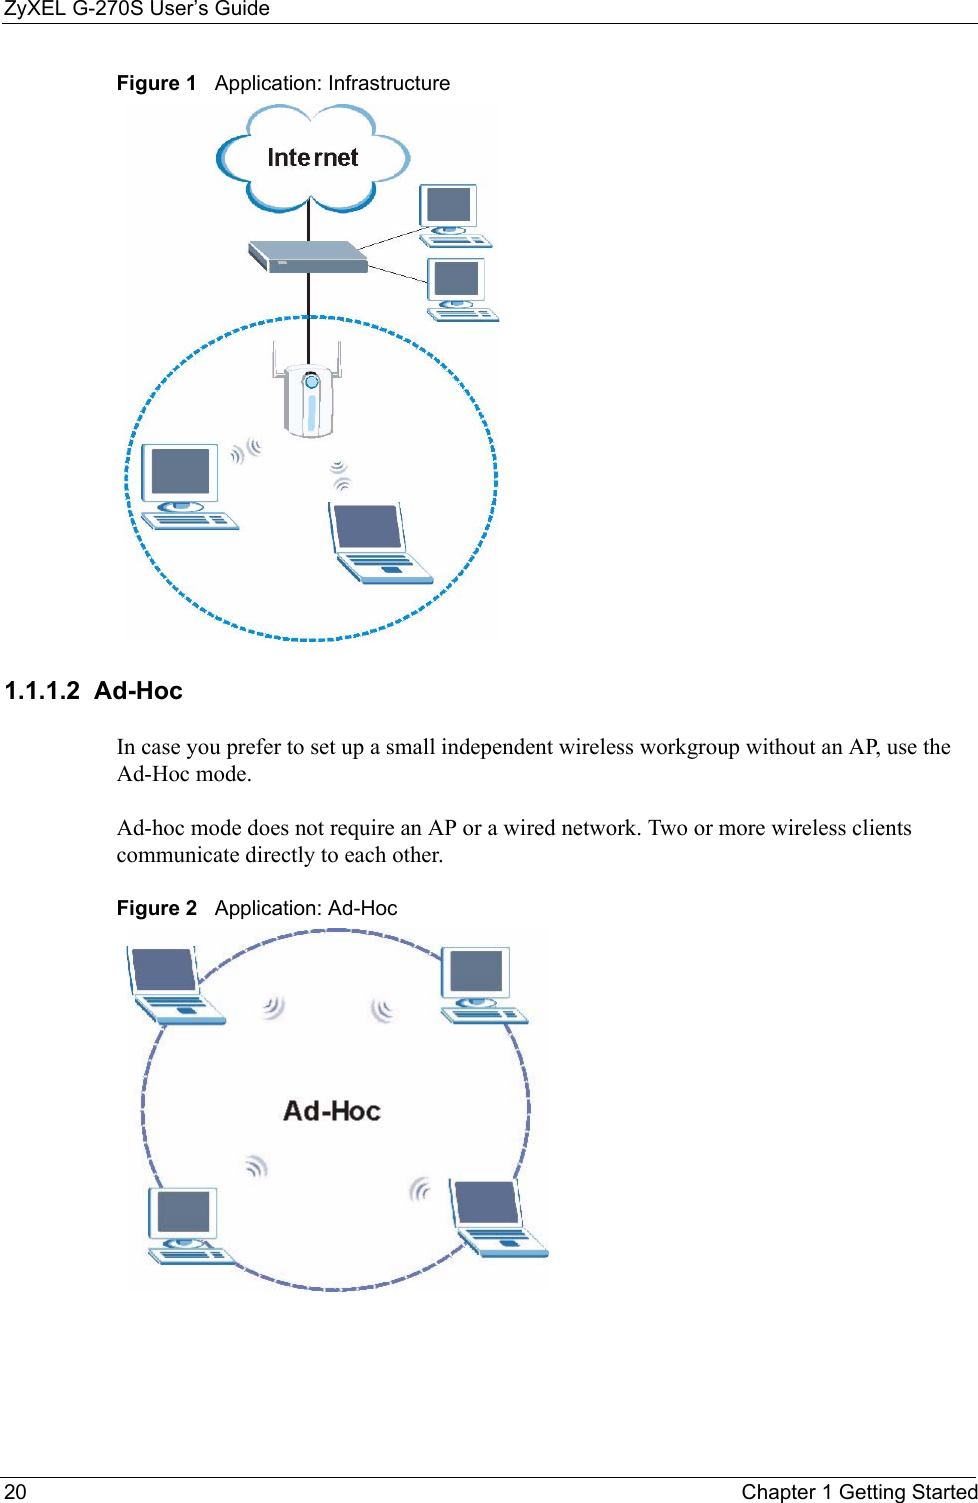 ZyXEL G-270S User’s Guide20 Chapter 1 Getting StartedFigure 1   Application: Infrastructure 1.1.1.2  Ad-Hoc In case you prefer to set up a small independent wireless workgroup without an AP, use the Ad-Hoc mode.Ad-hoc mode does not require an AP or a wired network. Two or more wireless clients communicate directly to each other. Figure 2   Application: Ad-Hoc 